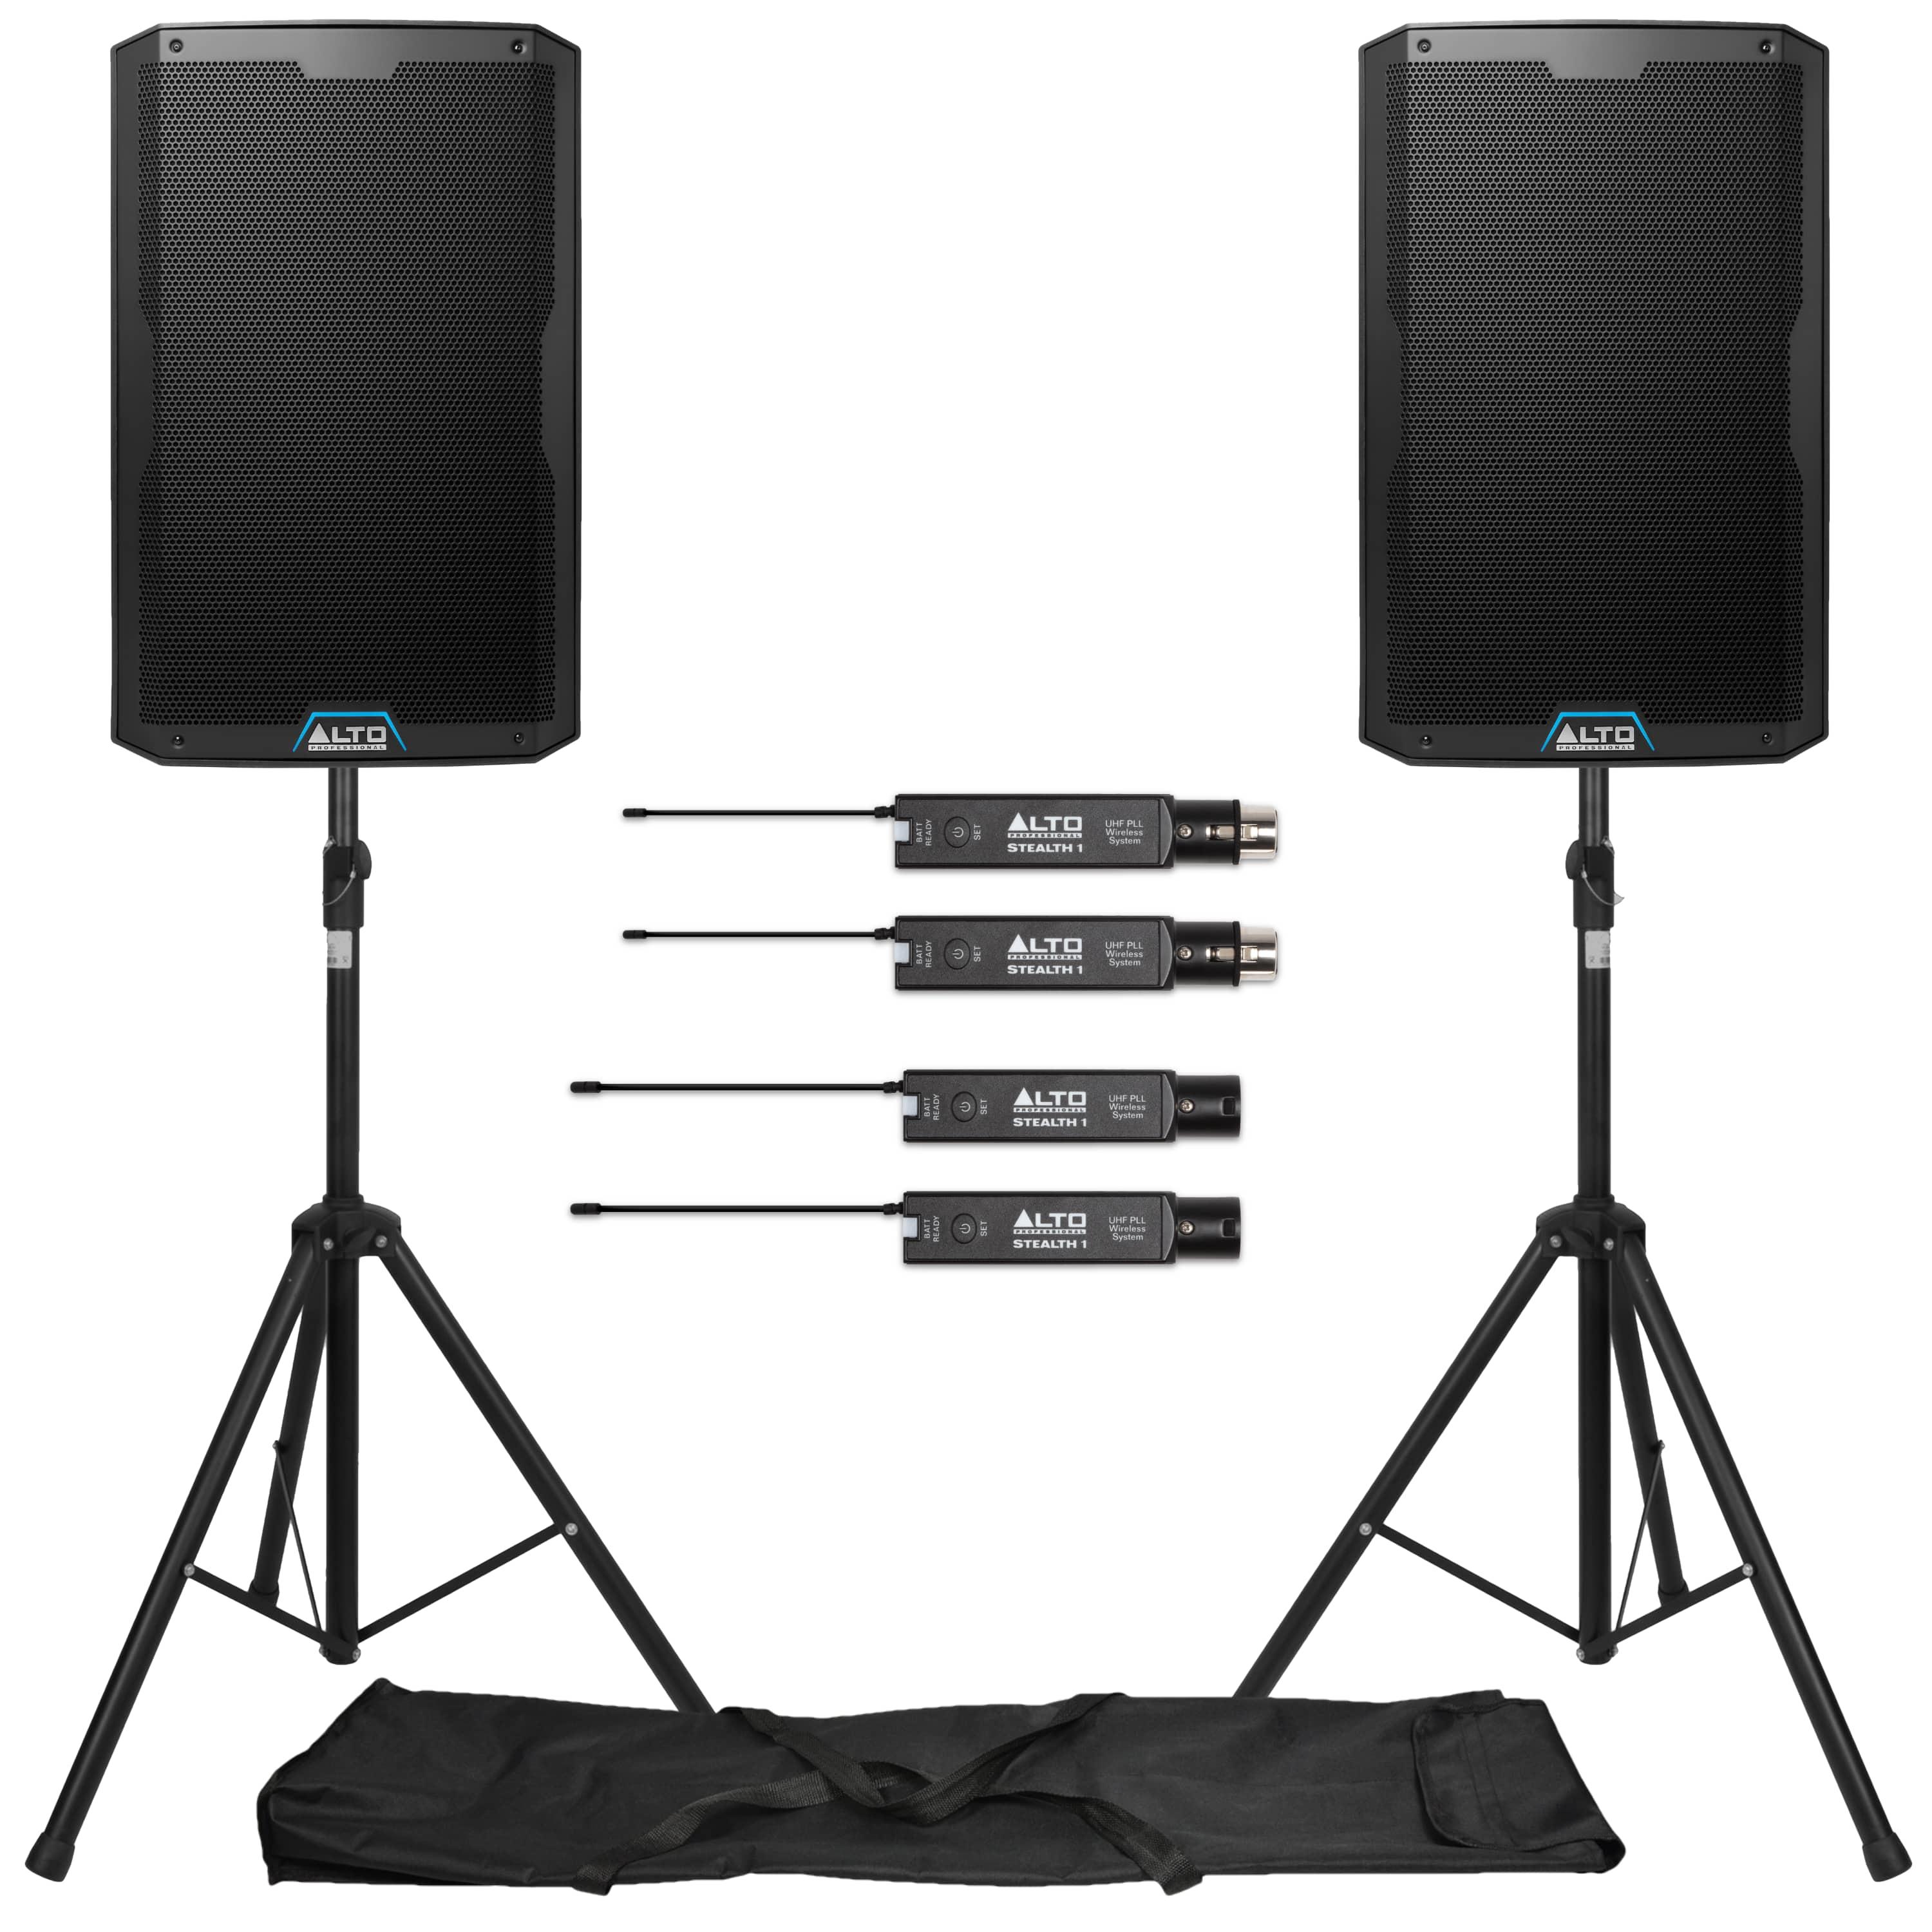 Alto Professional TS415 Wireless Package